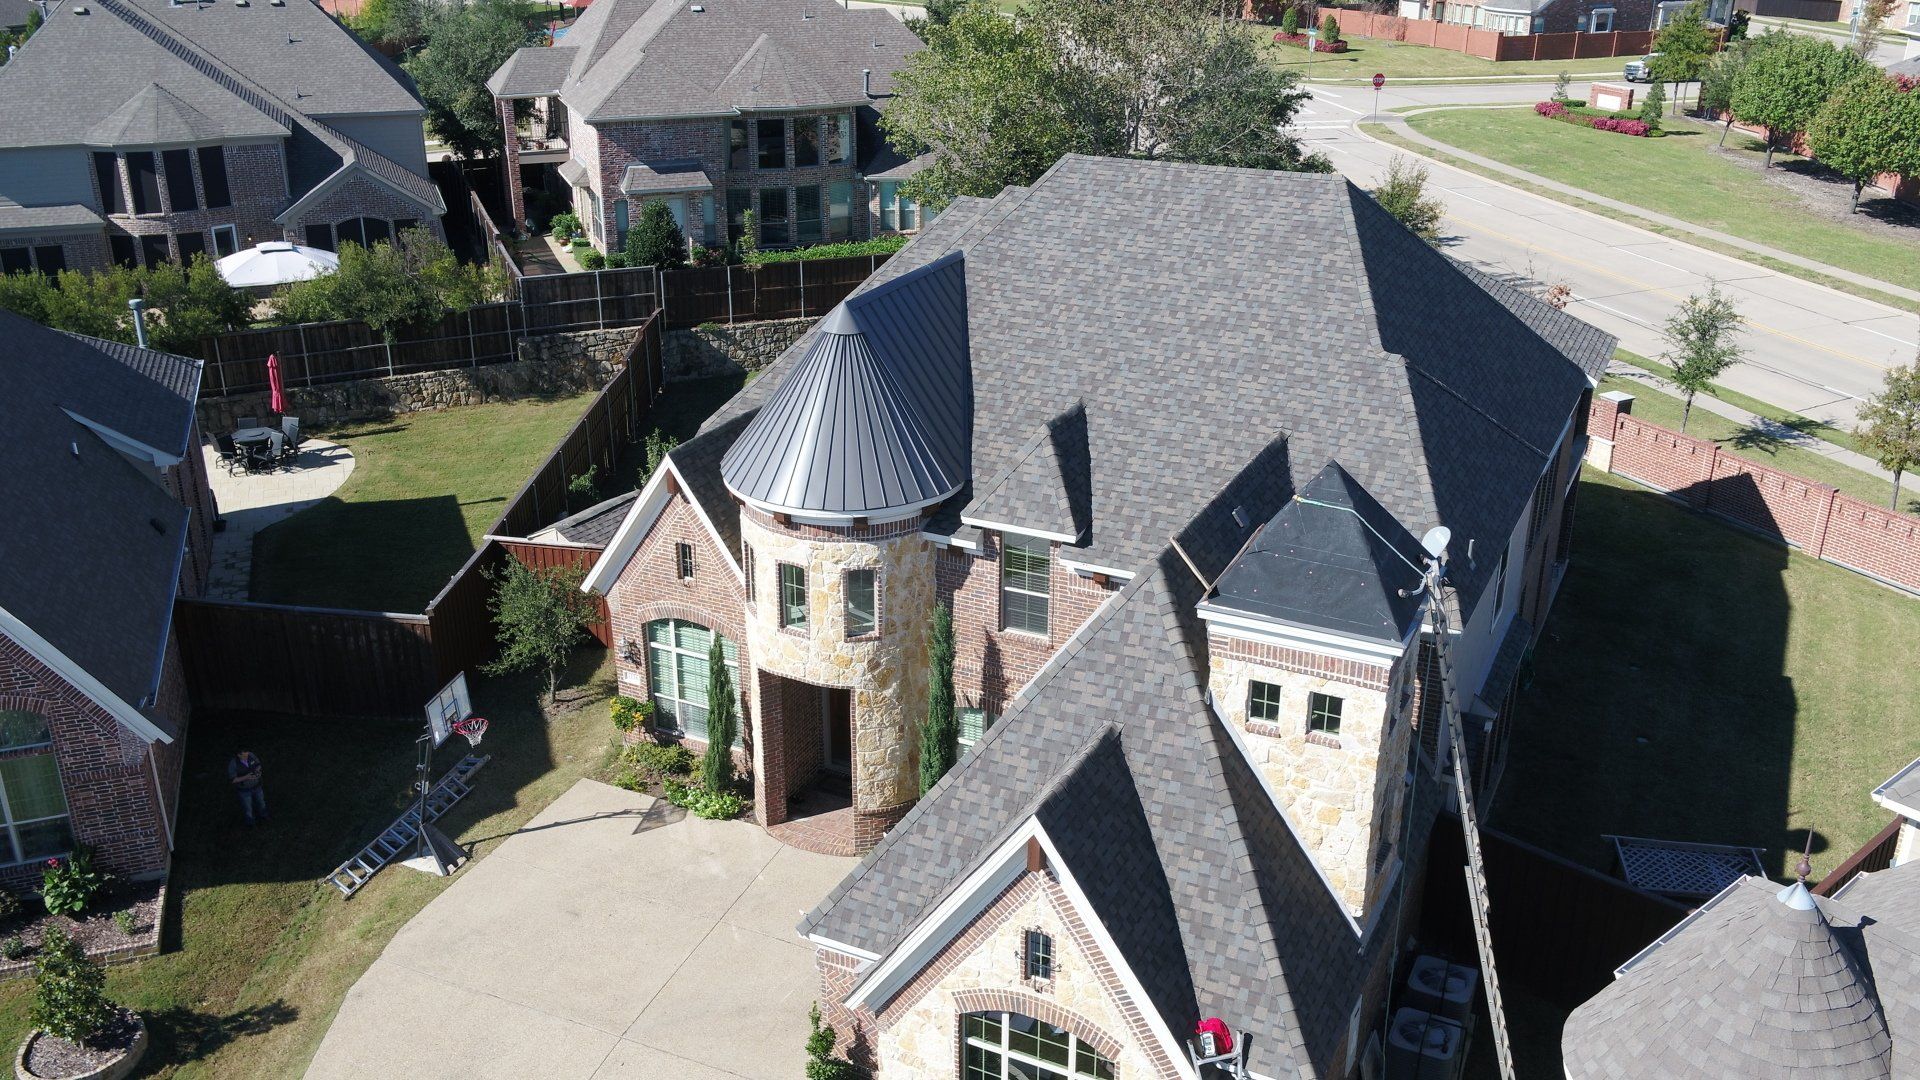 Irving Texas Hail Damage roof replacement shark tail standing seam metal upgrade, Standing seam upgrade on look out tower